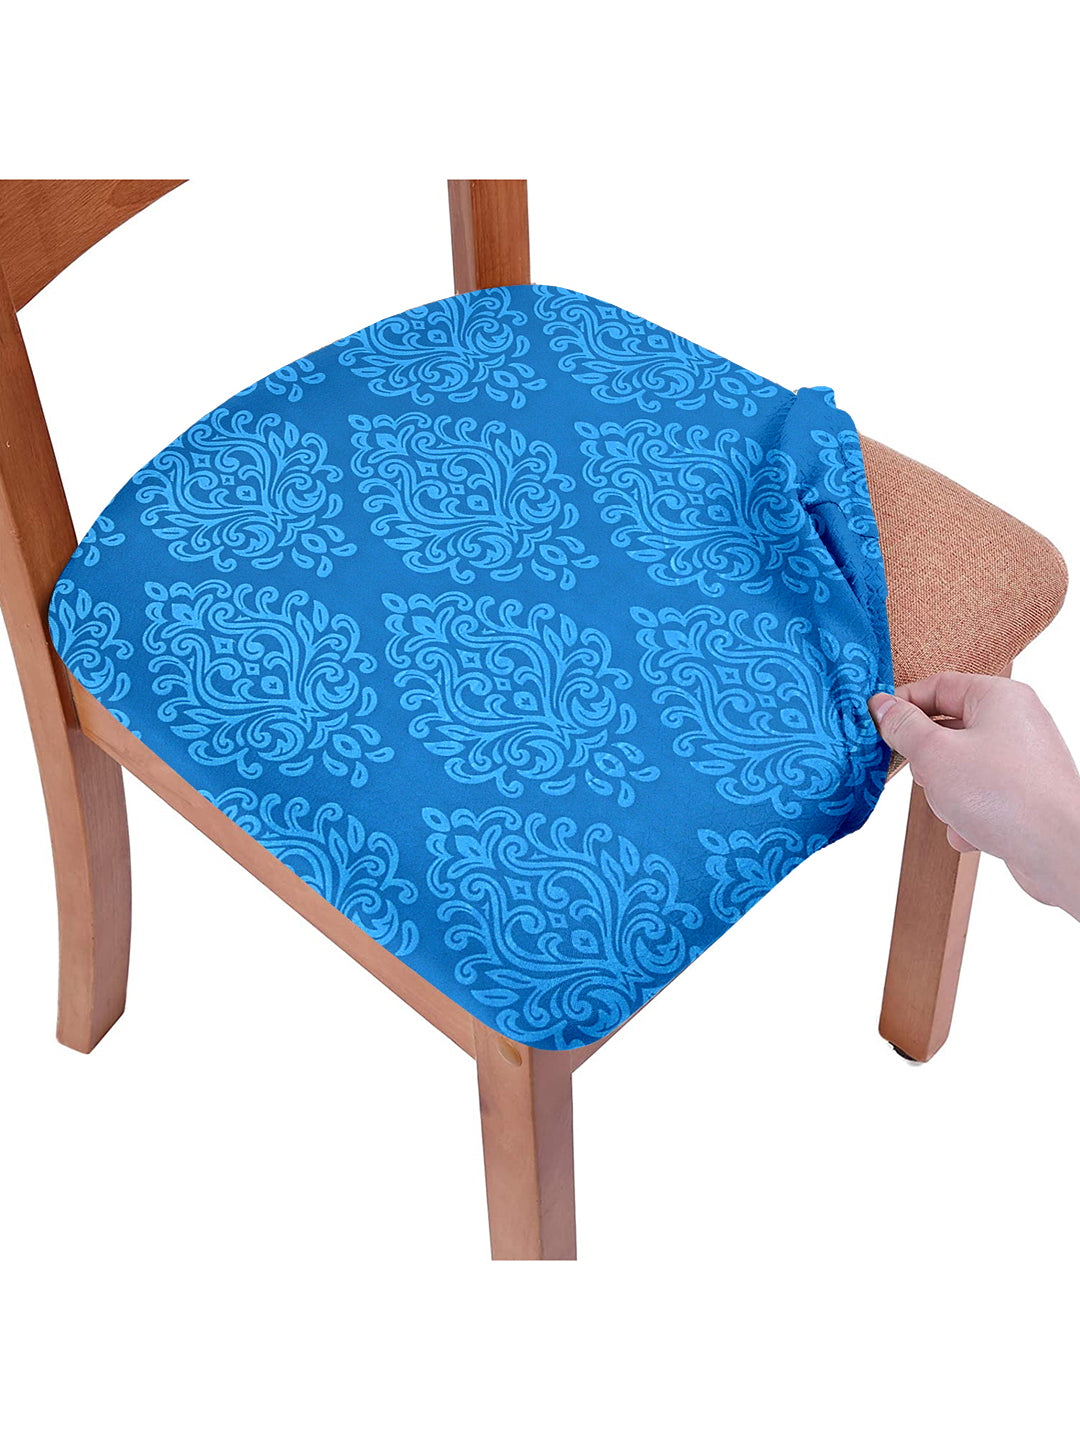 Stretchable Ethnic Printed Non Slip Chair Pad Cover Pack of 1- Navy Blue